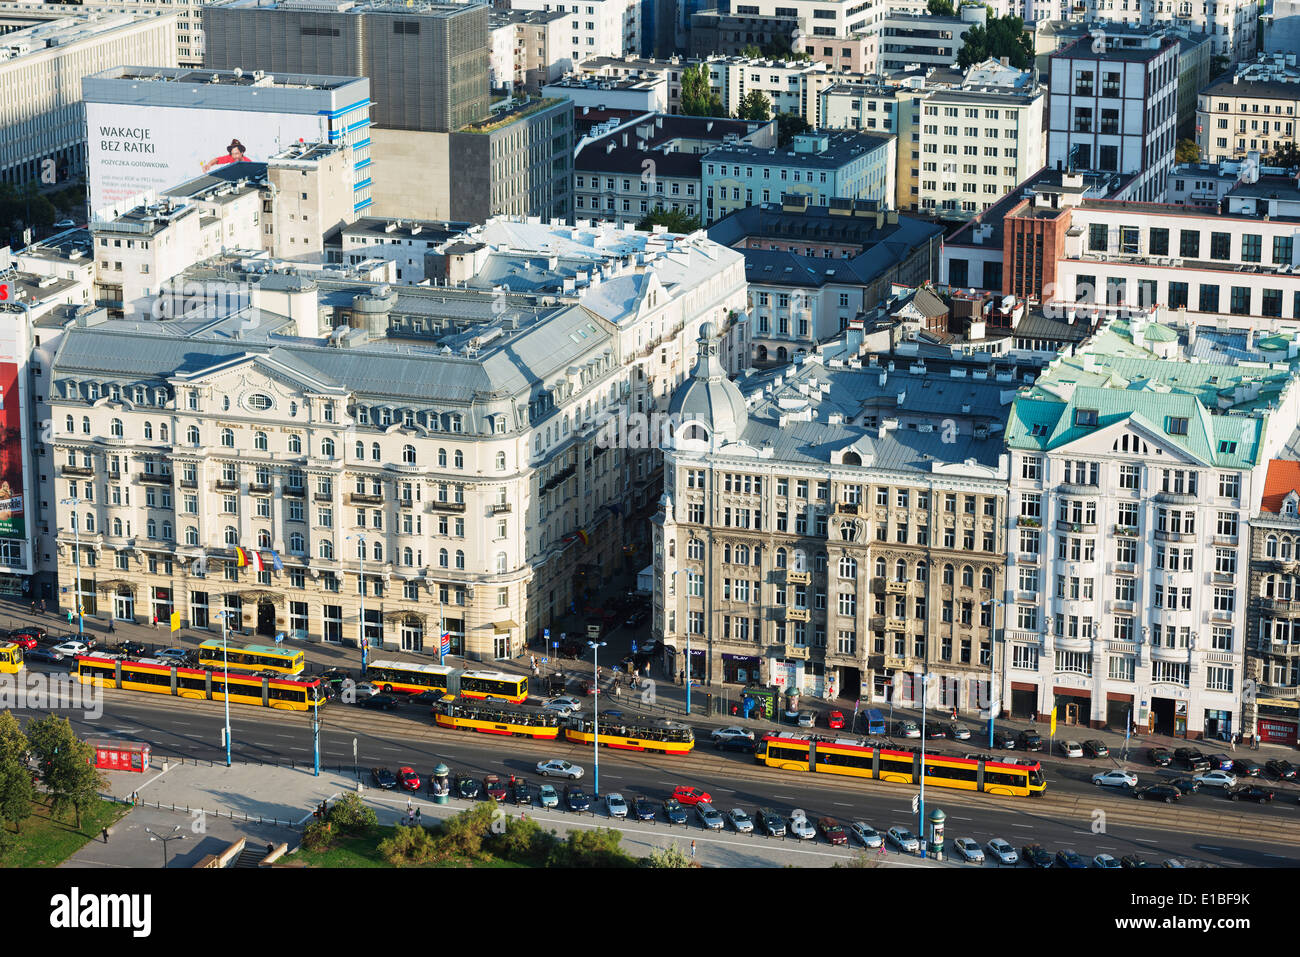 Europe Poland Warsaw City View From Palace Of Culture And Science Stock Photo Alamy